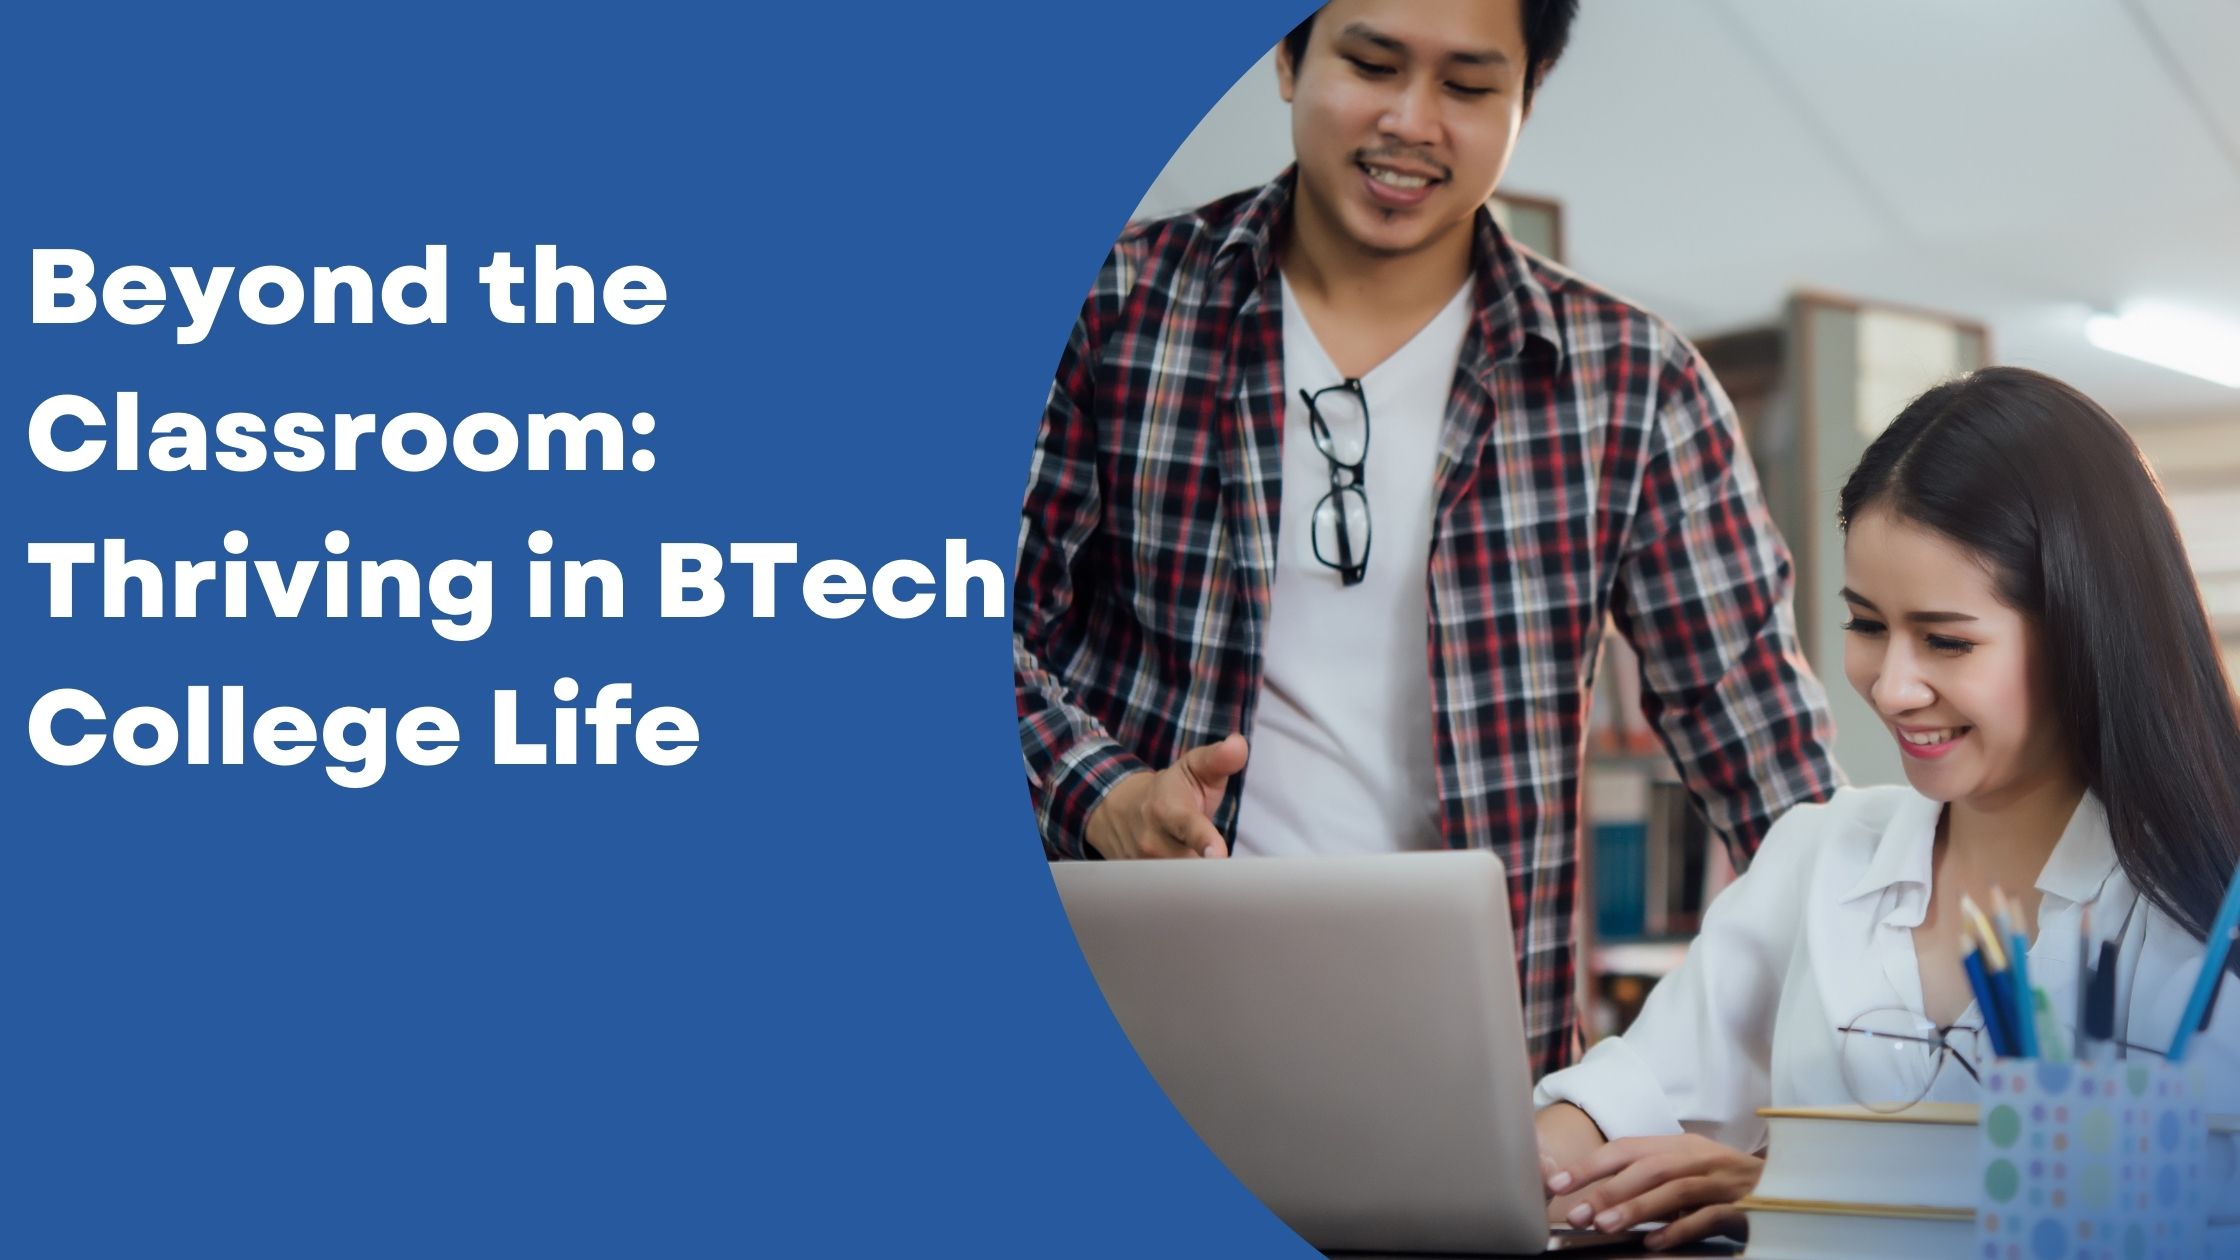 Beyond the Classroom: Thriving in BTech College Life